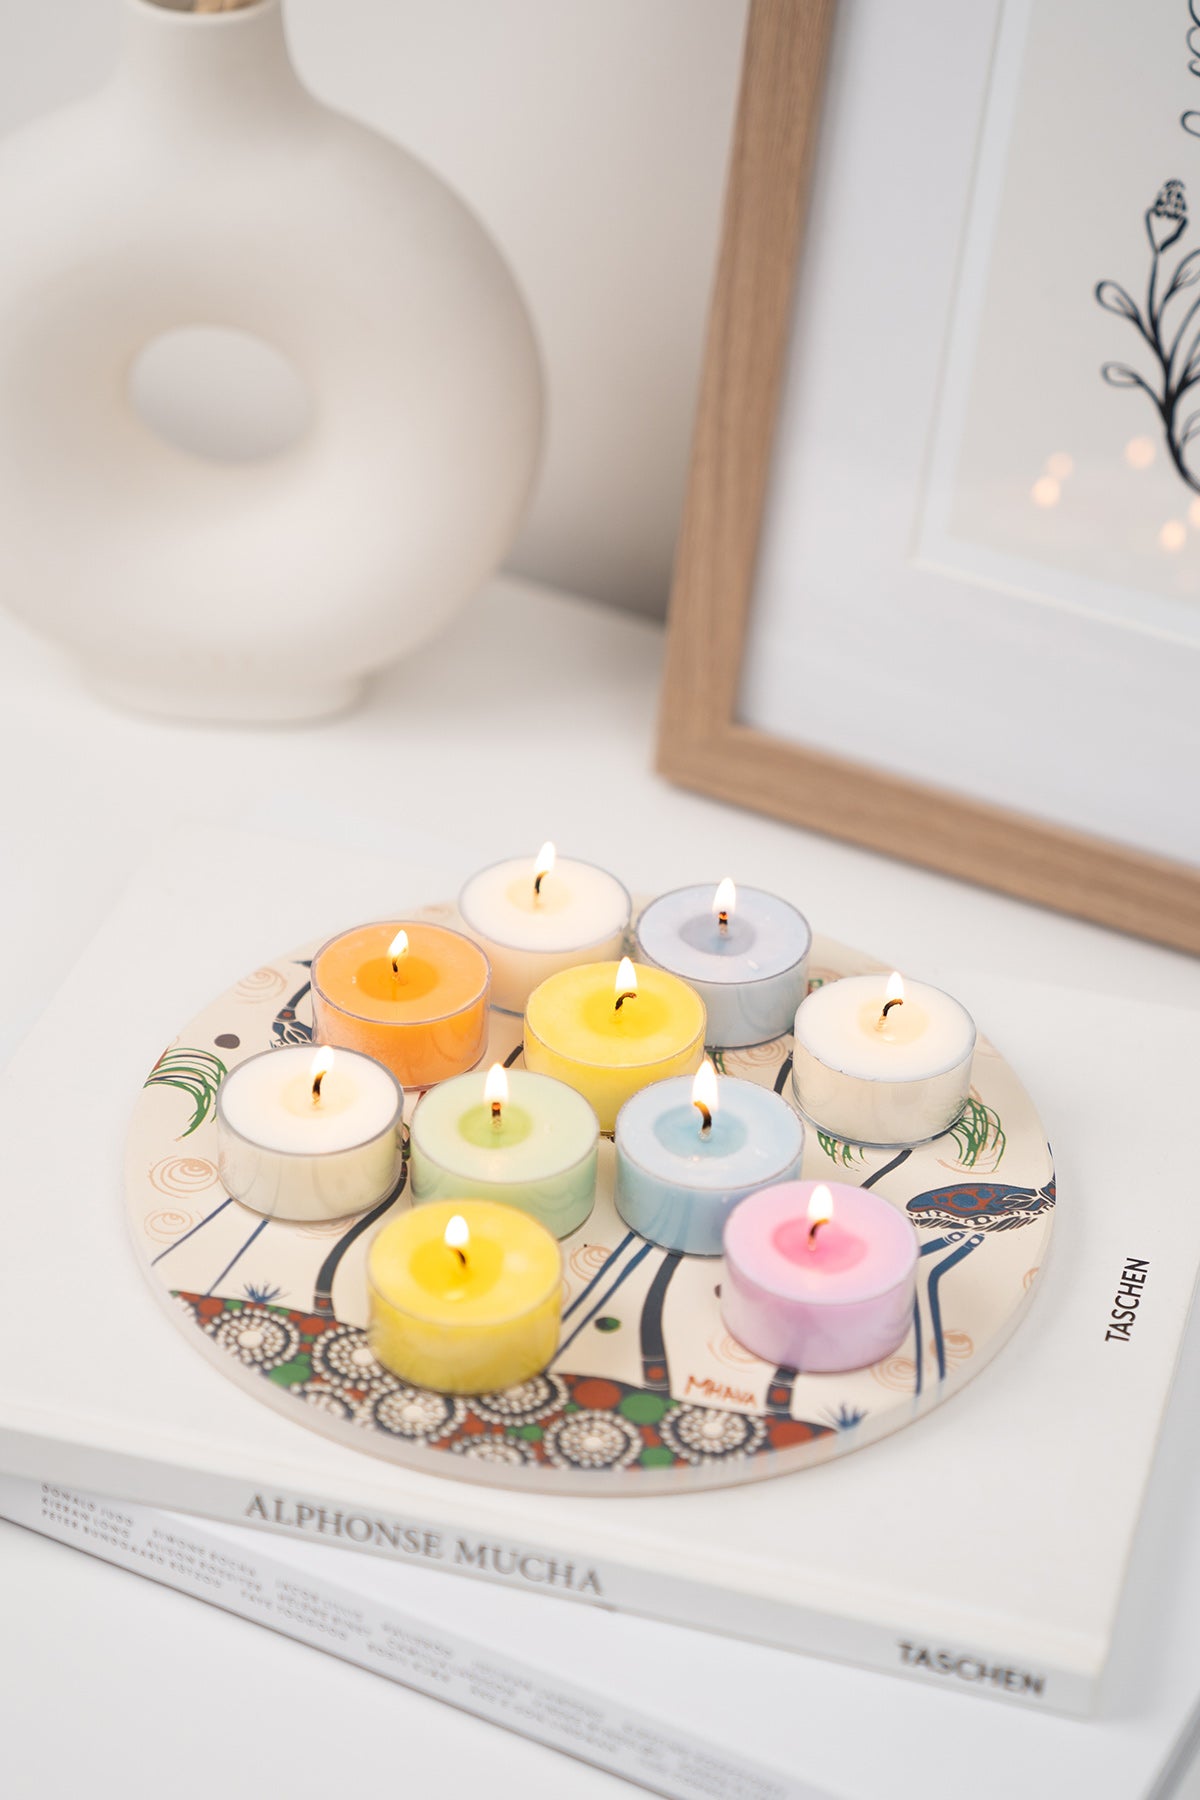 How a Tealight Can Change Any Room